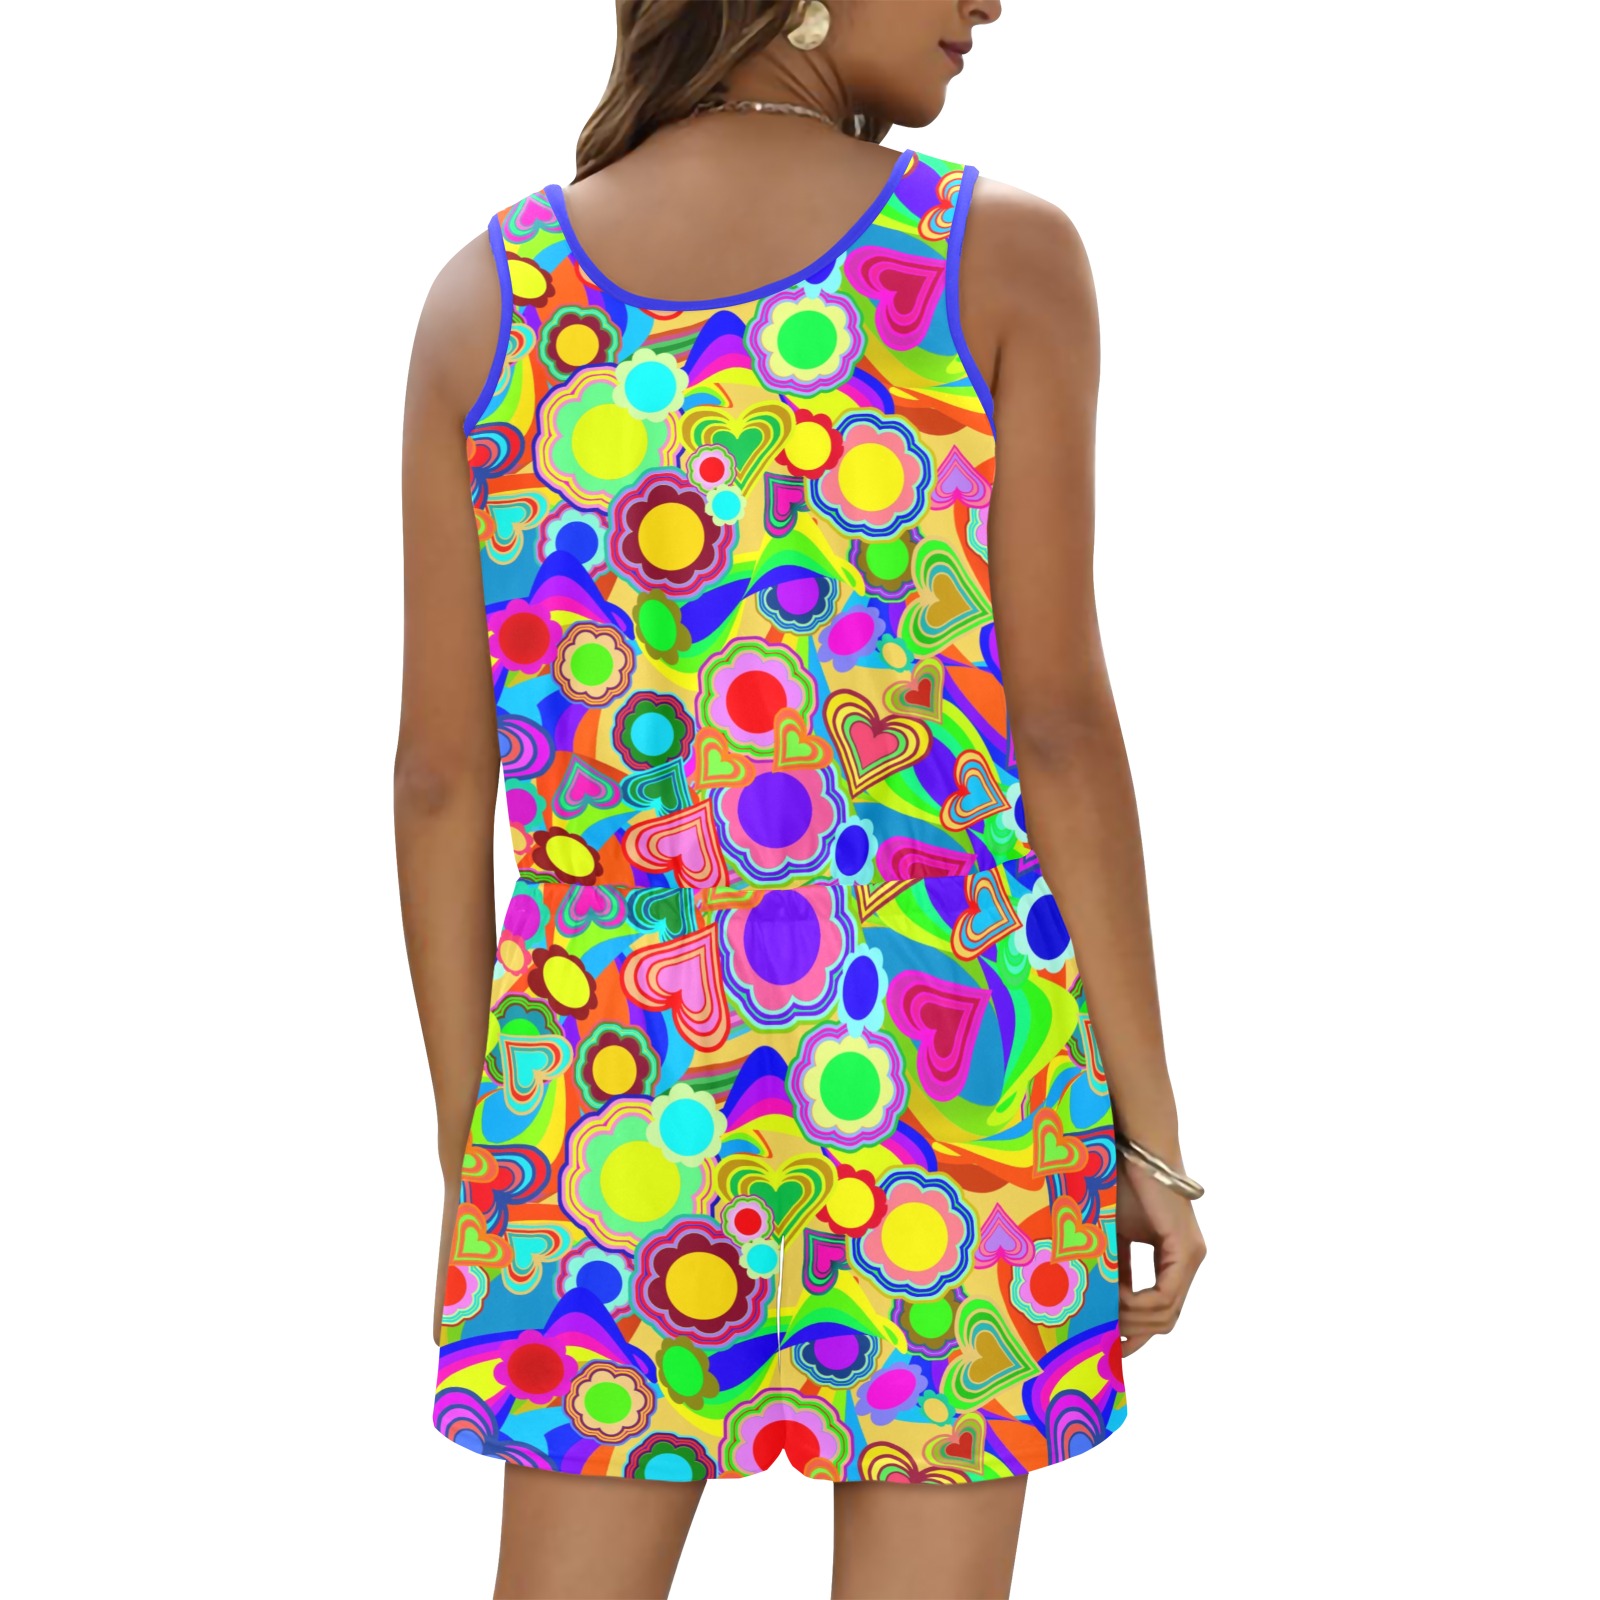 Groovy Hearts and Flowers All Over Print Vest Short Jumpsuit